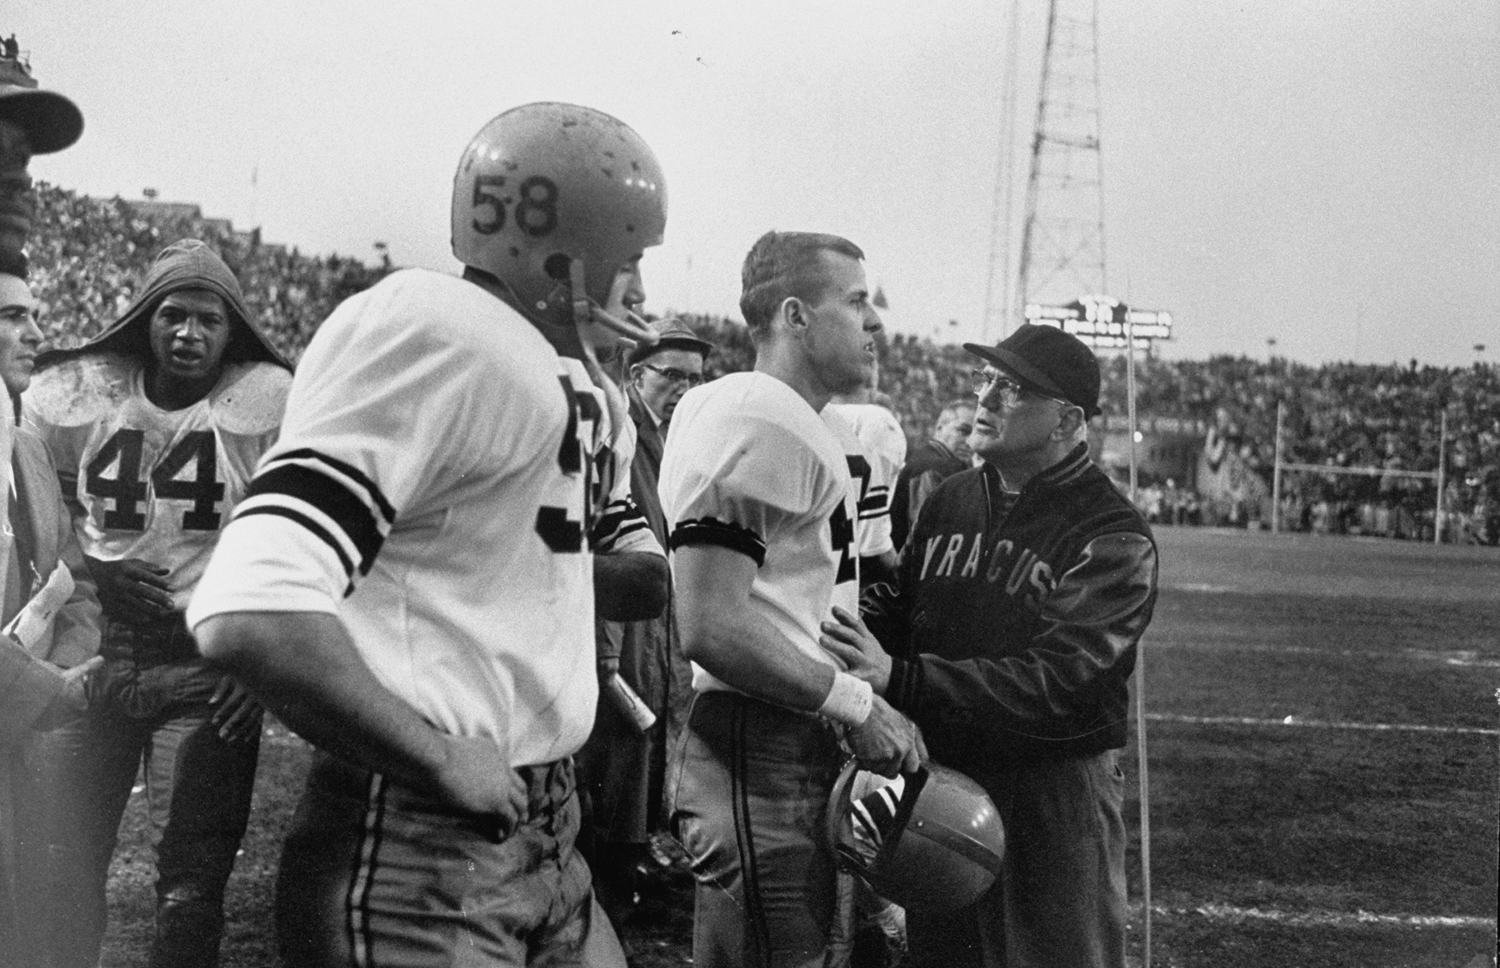 Syracuse coach Benny Schwartzwalder talks to his players during their Cotton Bowl victory over Texas in 1960.